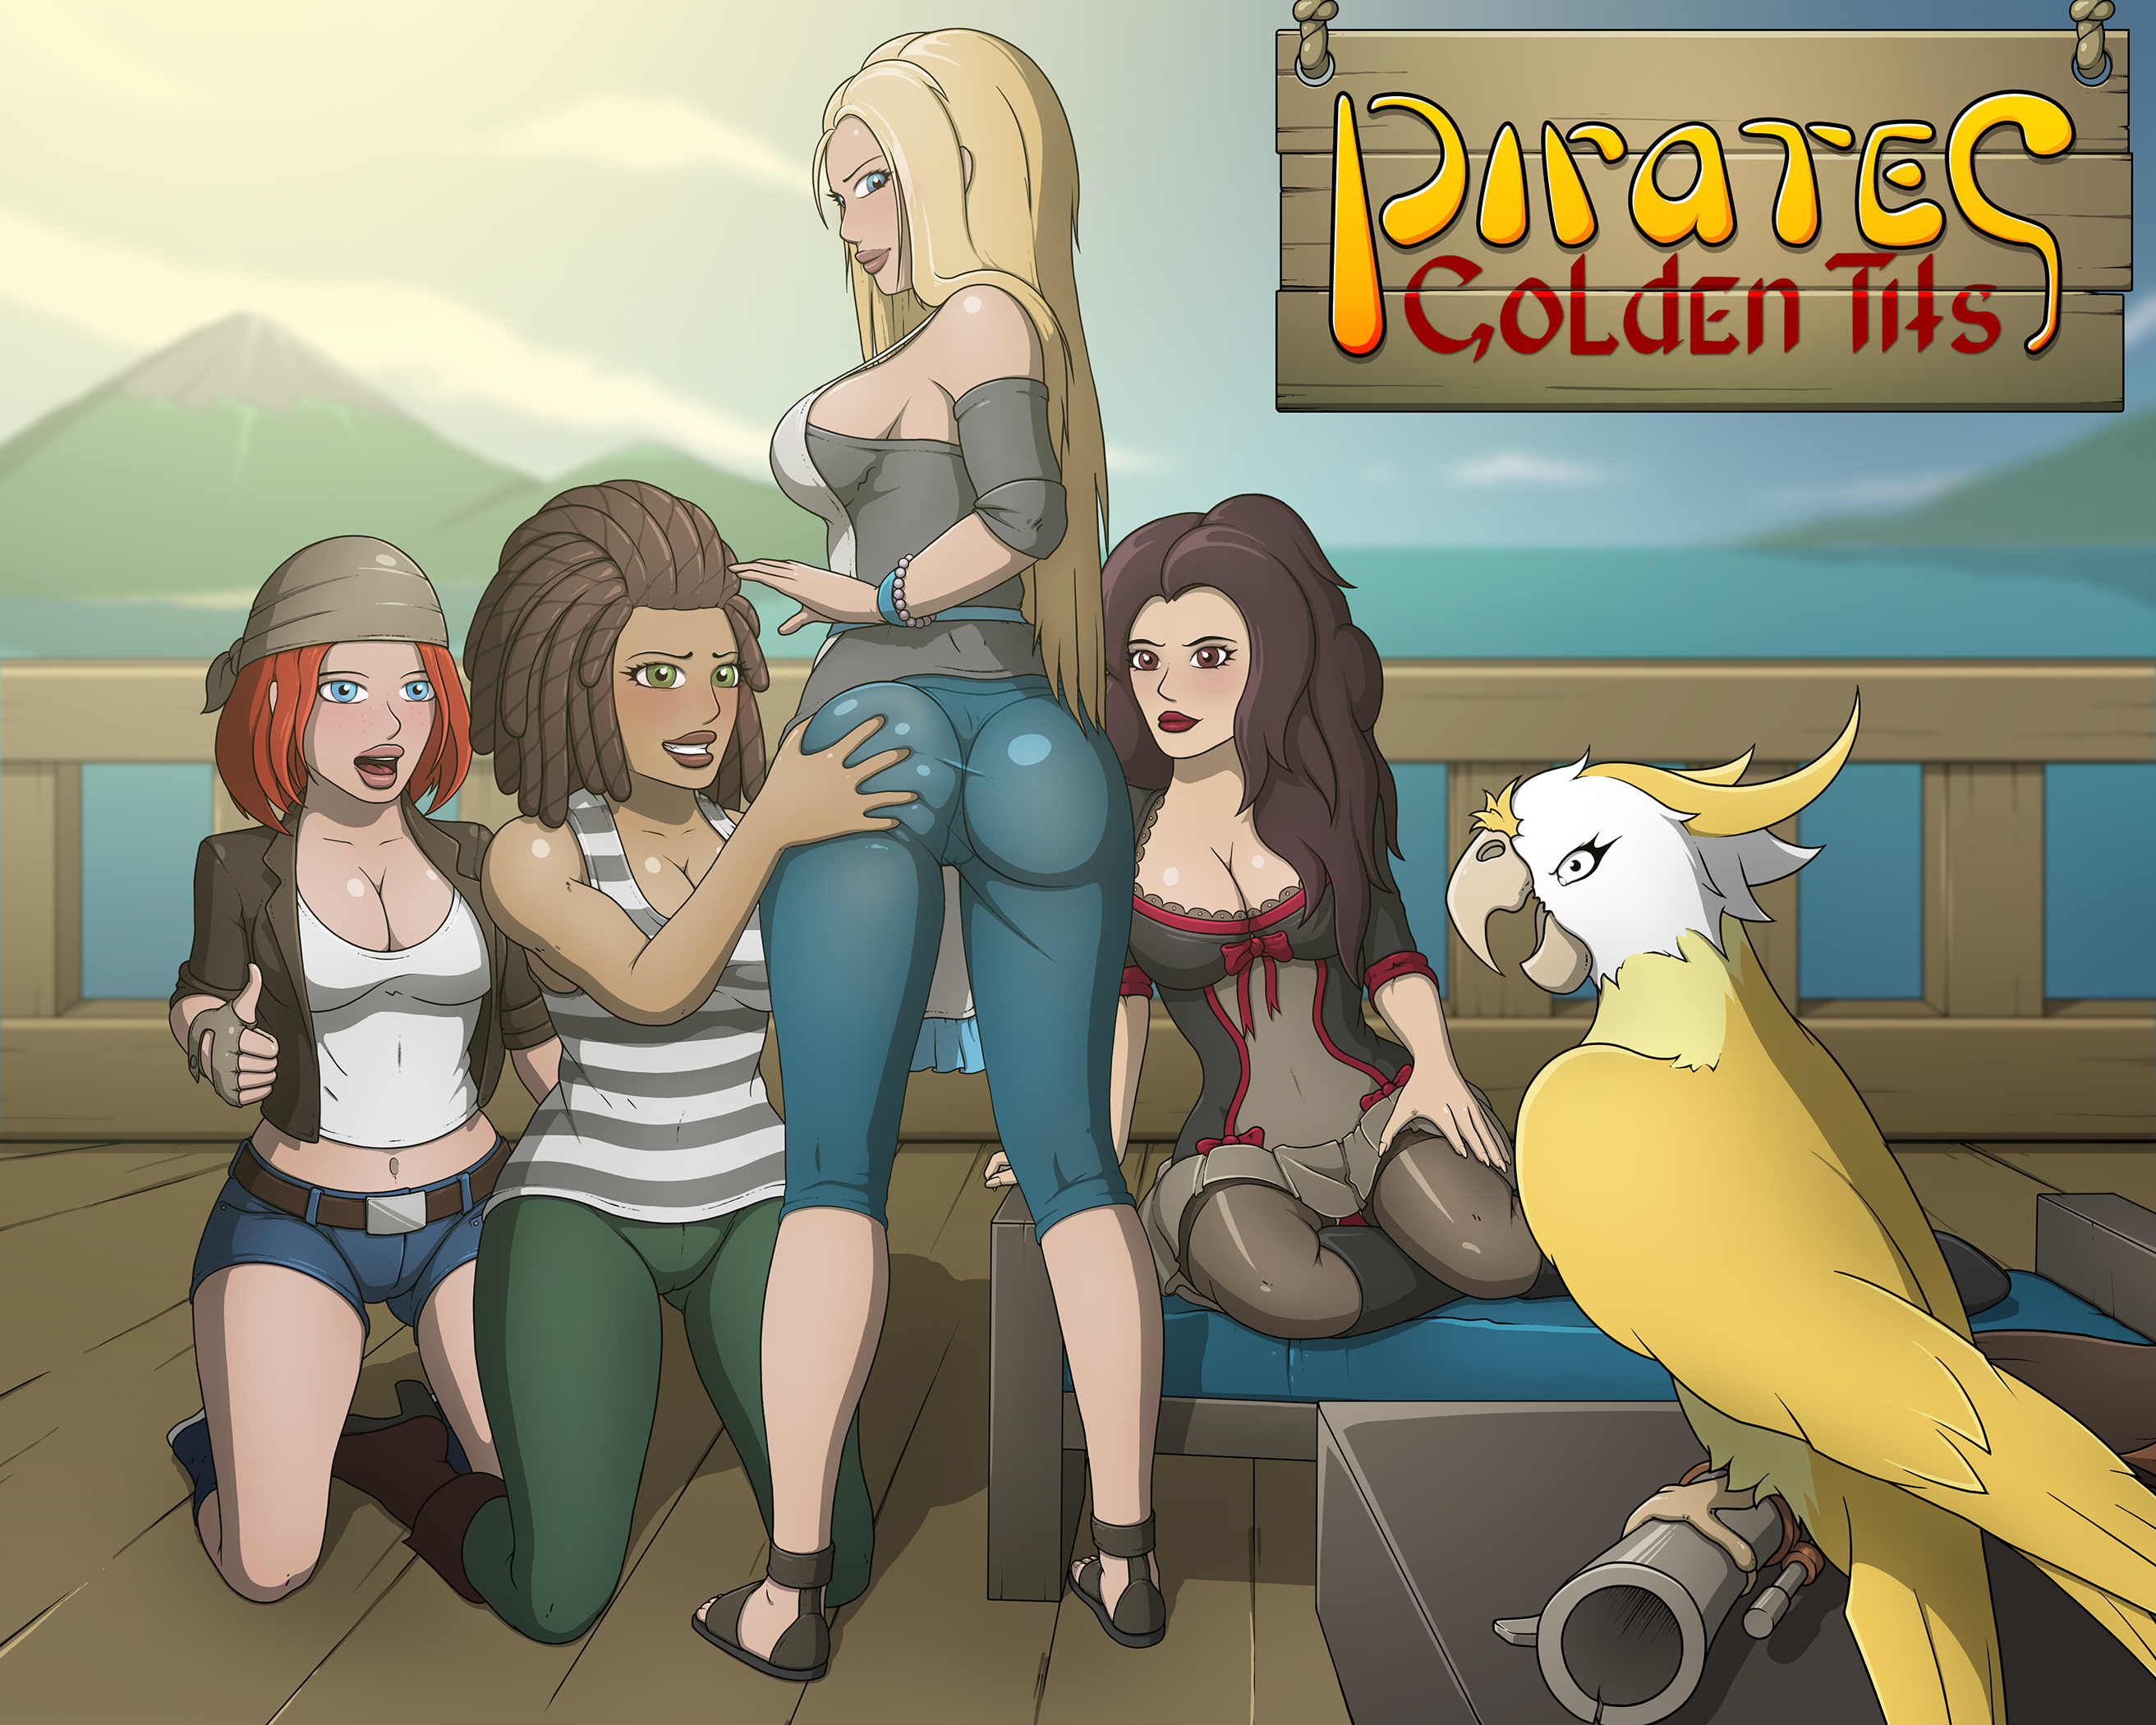 Pirate Boobs - Pirates : Golden Tits (0.22) [NSFW] 18+ by Hot Bunny